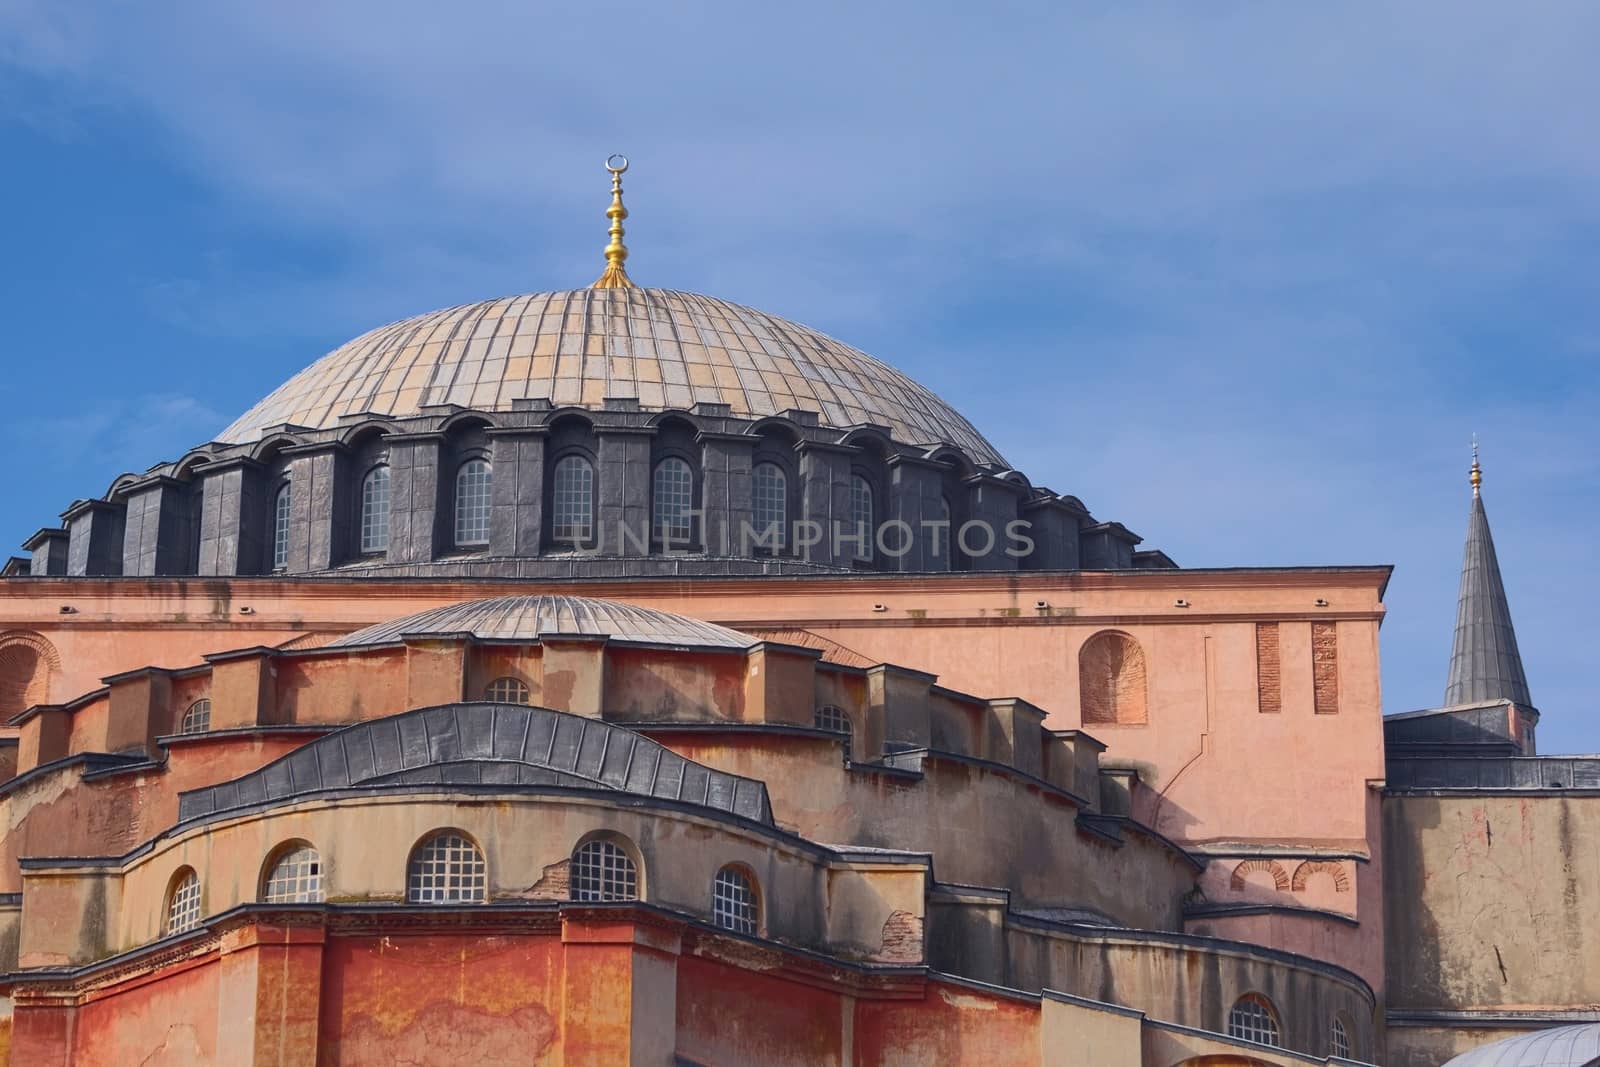 Back side of Hagia Sophia, in Istanbul, Turkey. Architectural detail of the main dome.